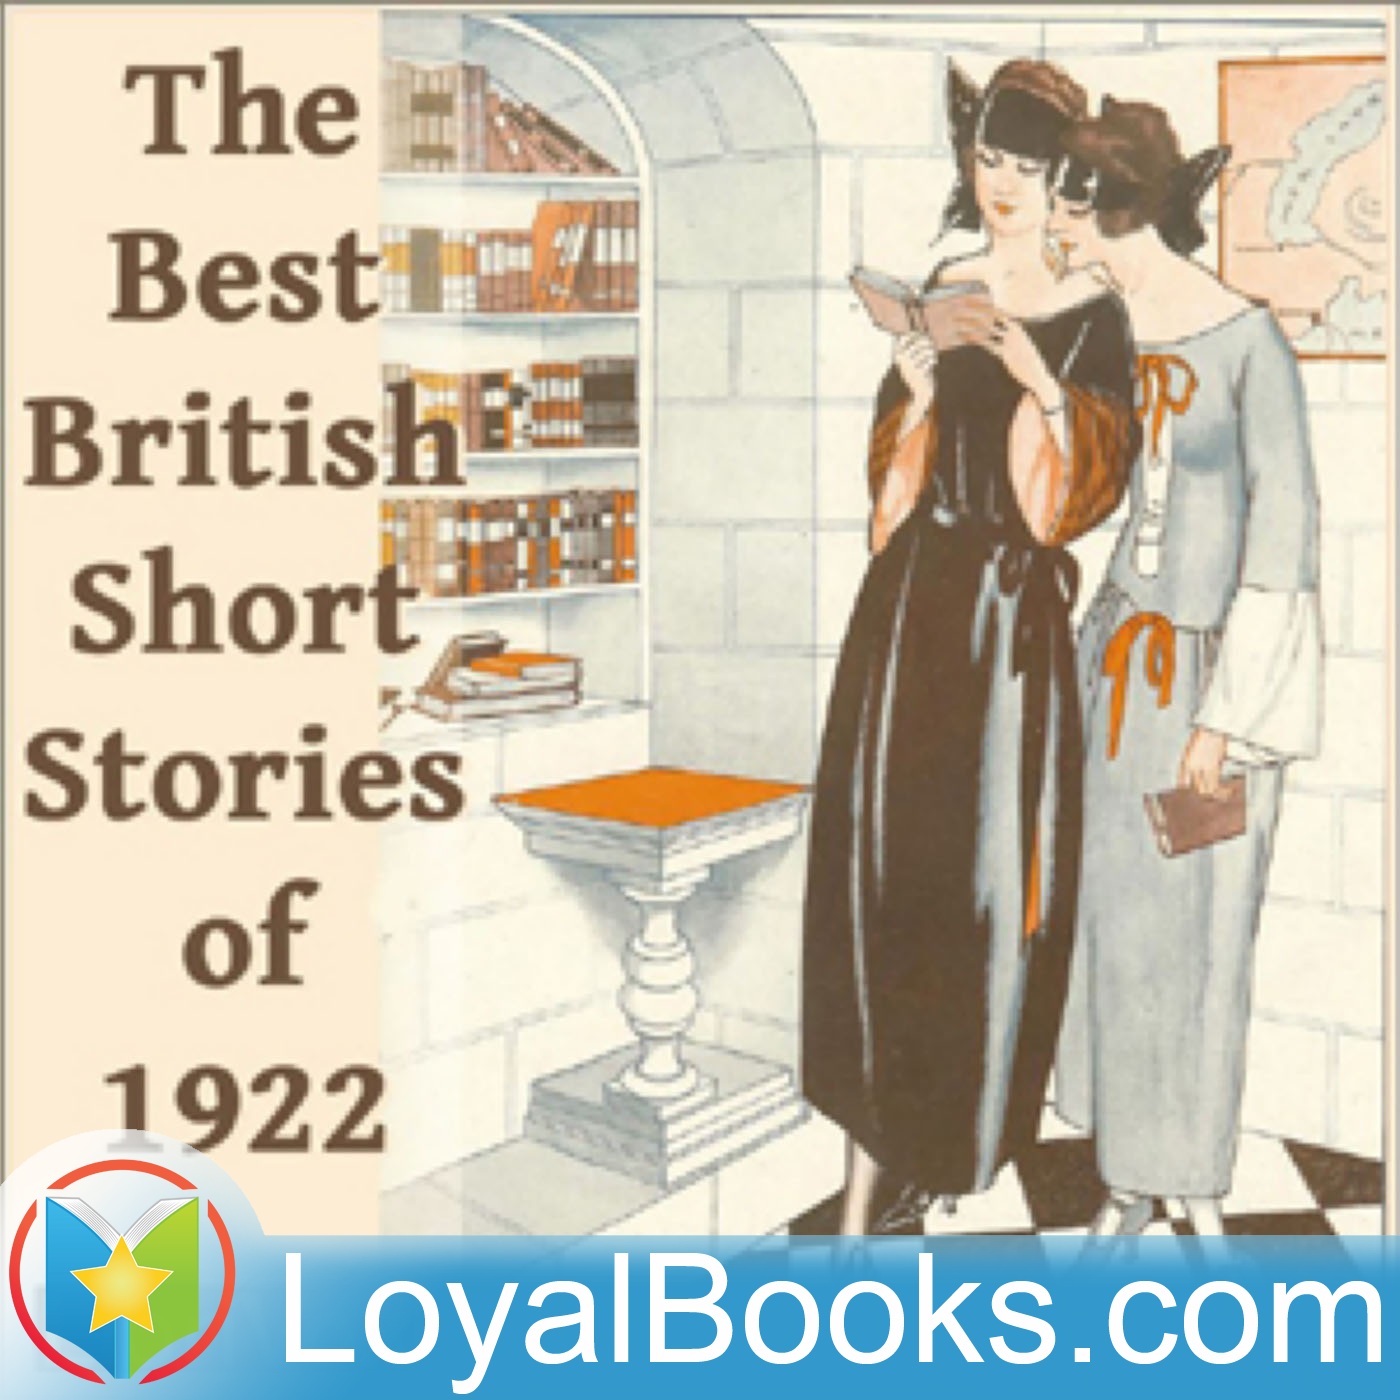 The Best British Short Stories of 1922 by Alfred Edgar Coppard